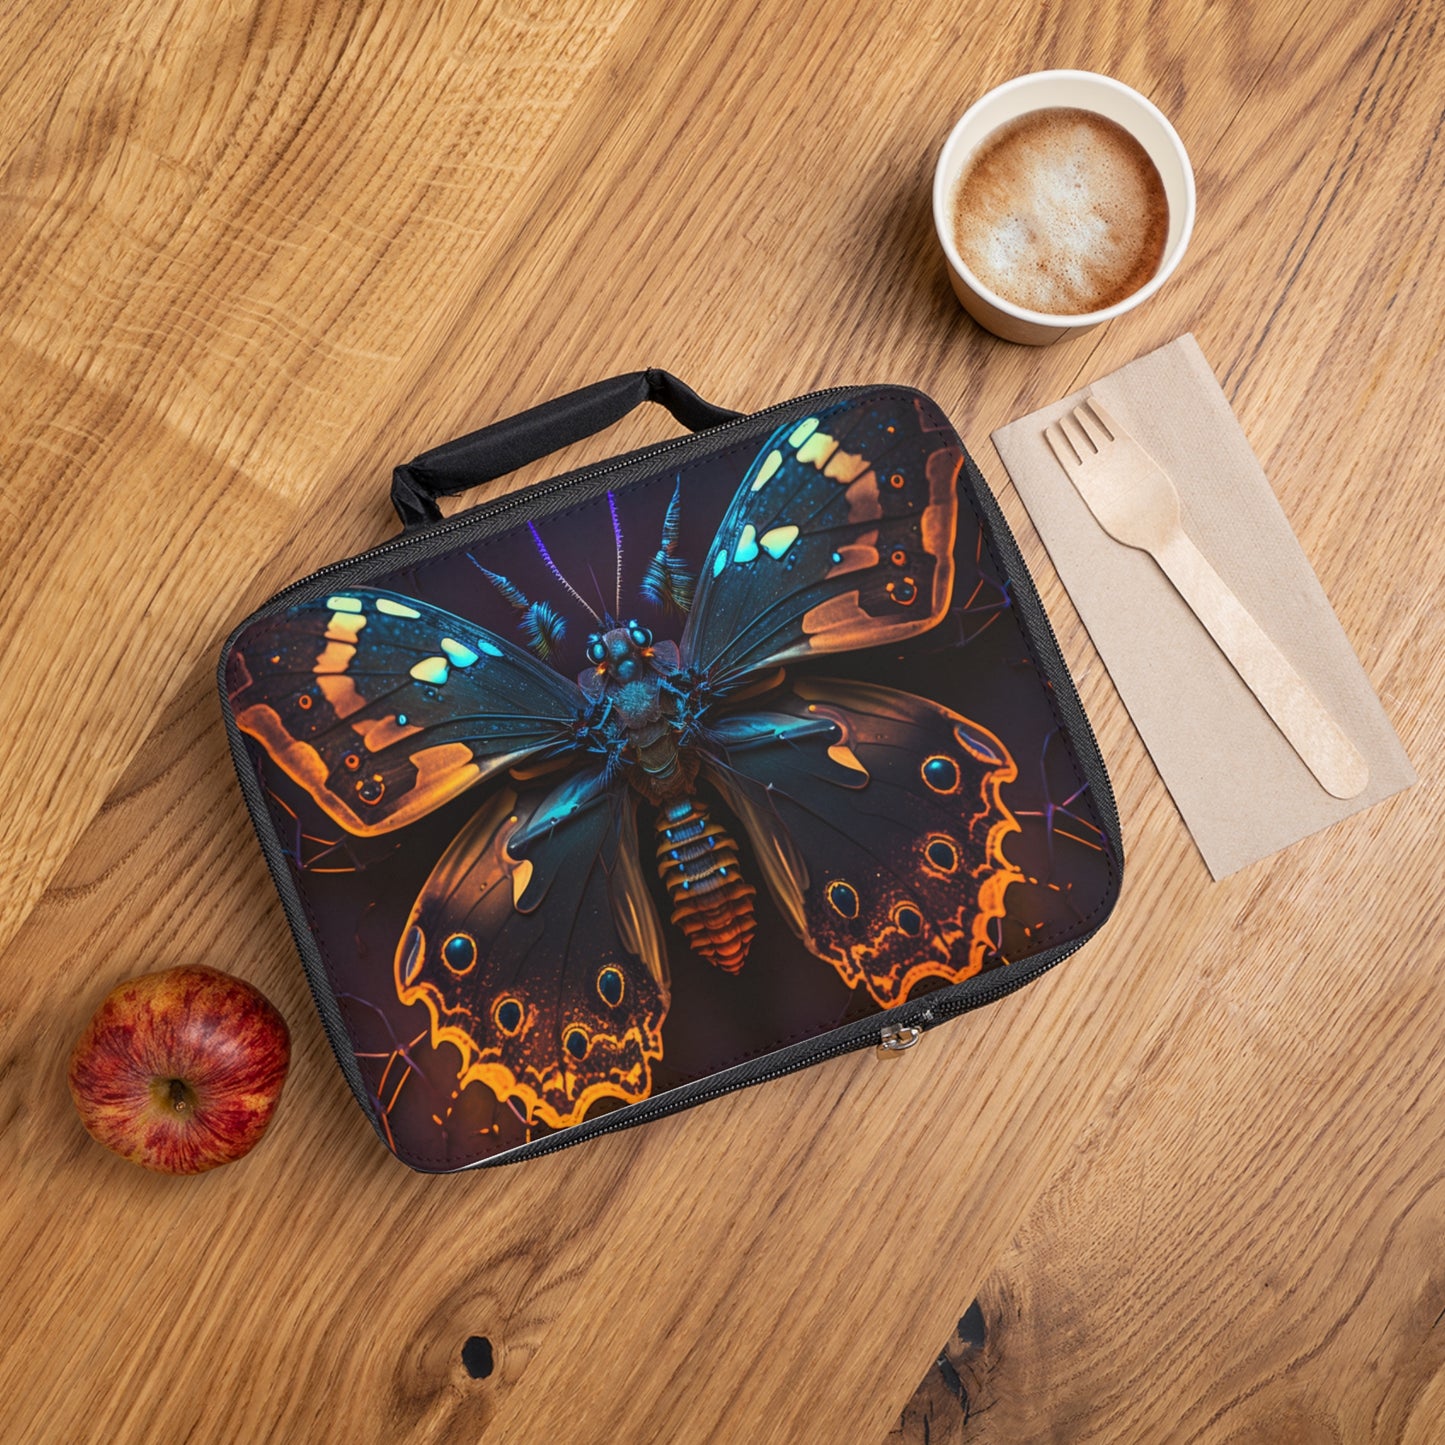 Lunch Bag Neon Hue Butterfly 2